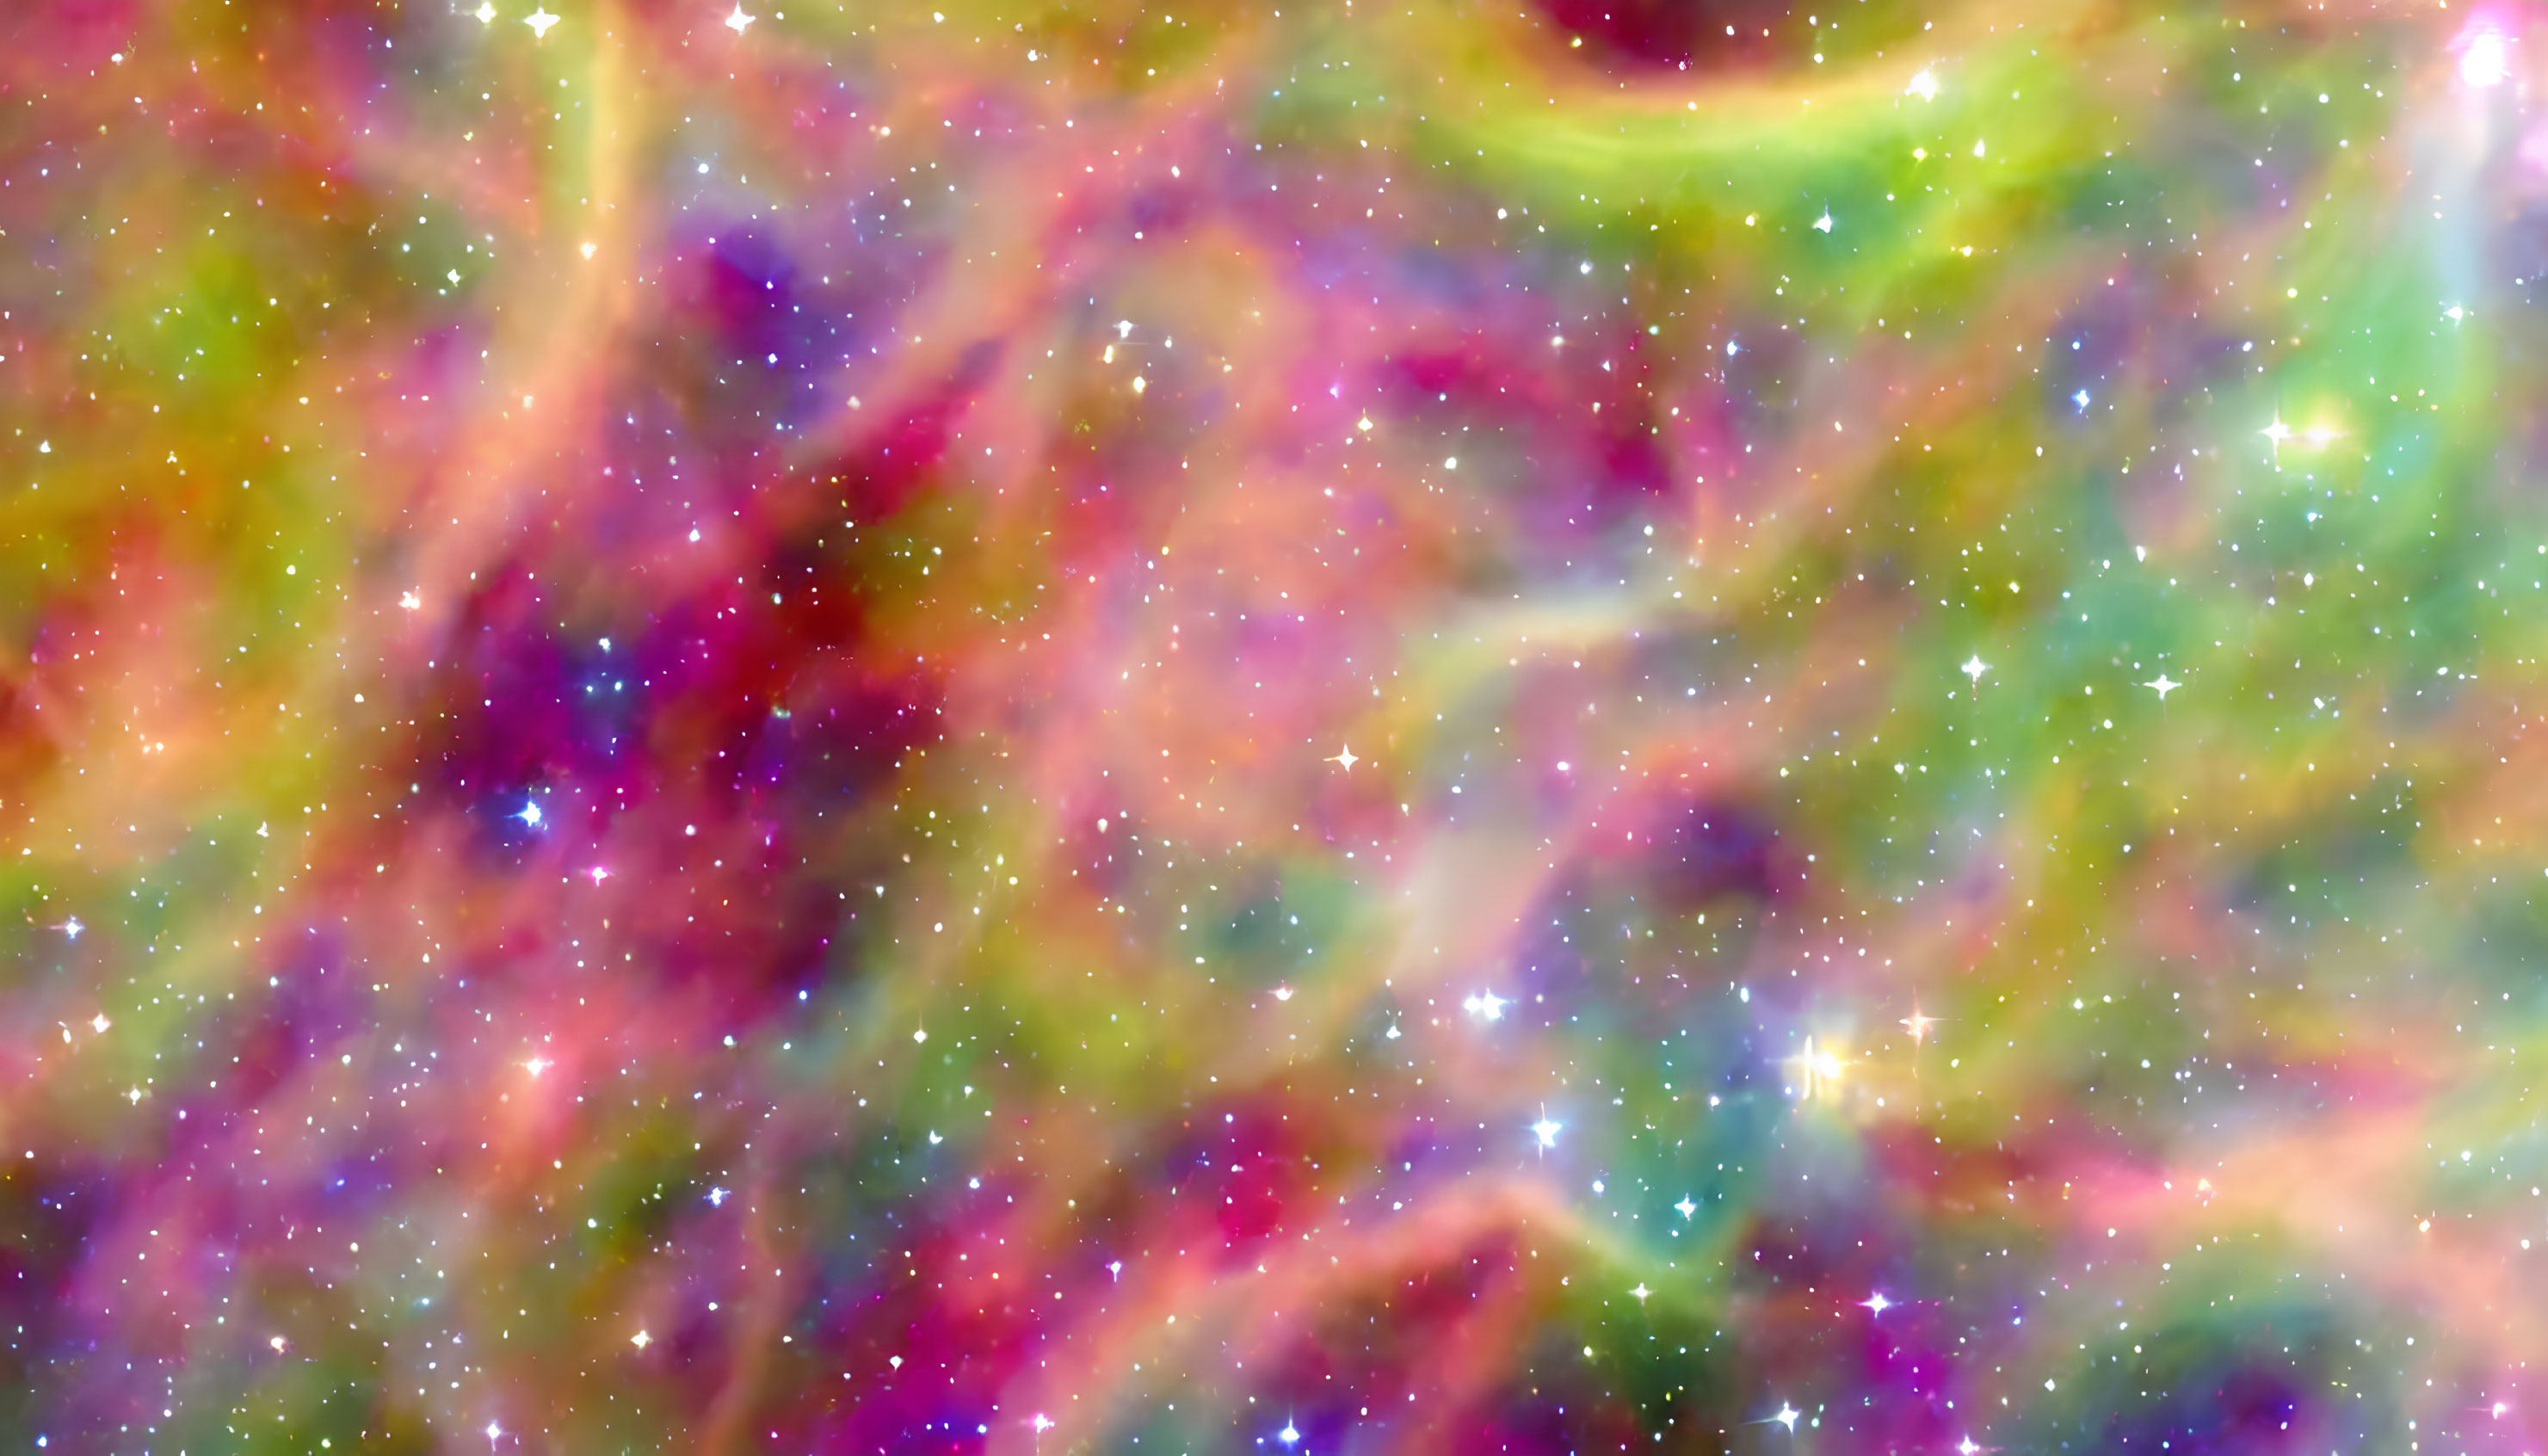 Colorful cosmic image with pink, purple, and green hues and sparkling stars.